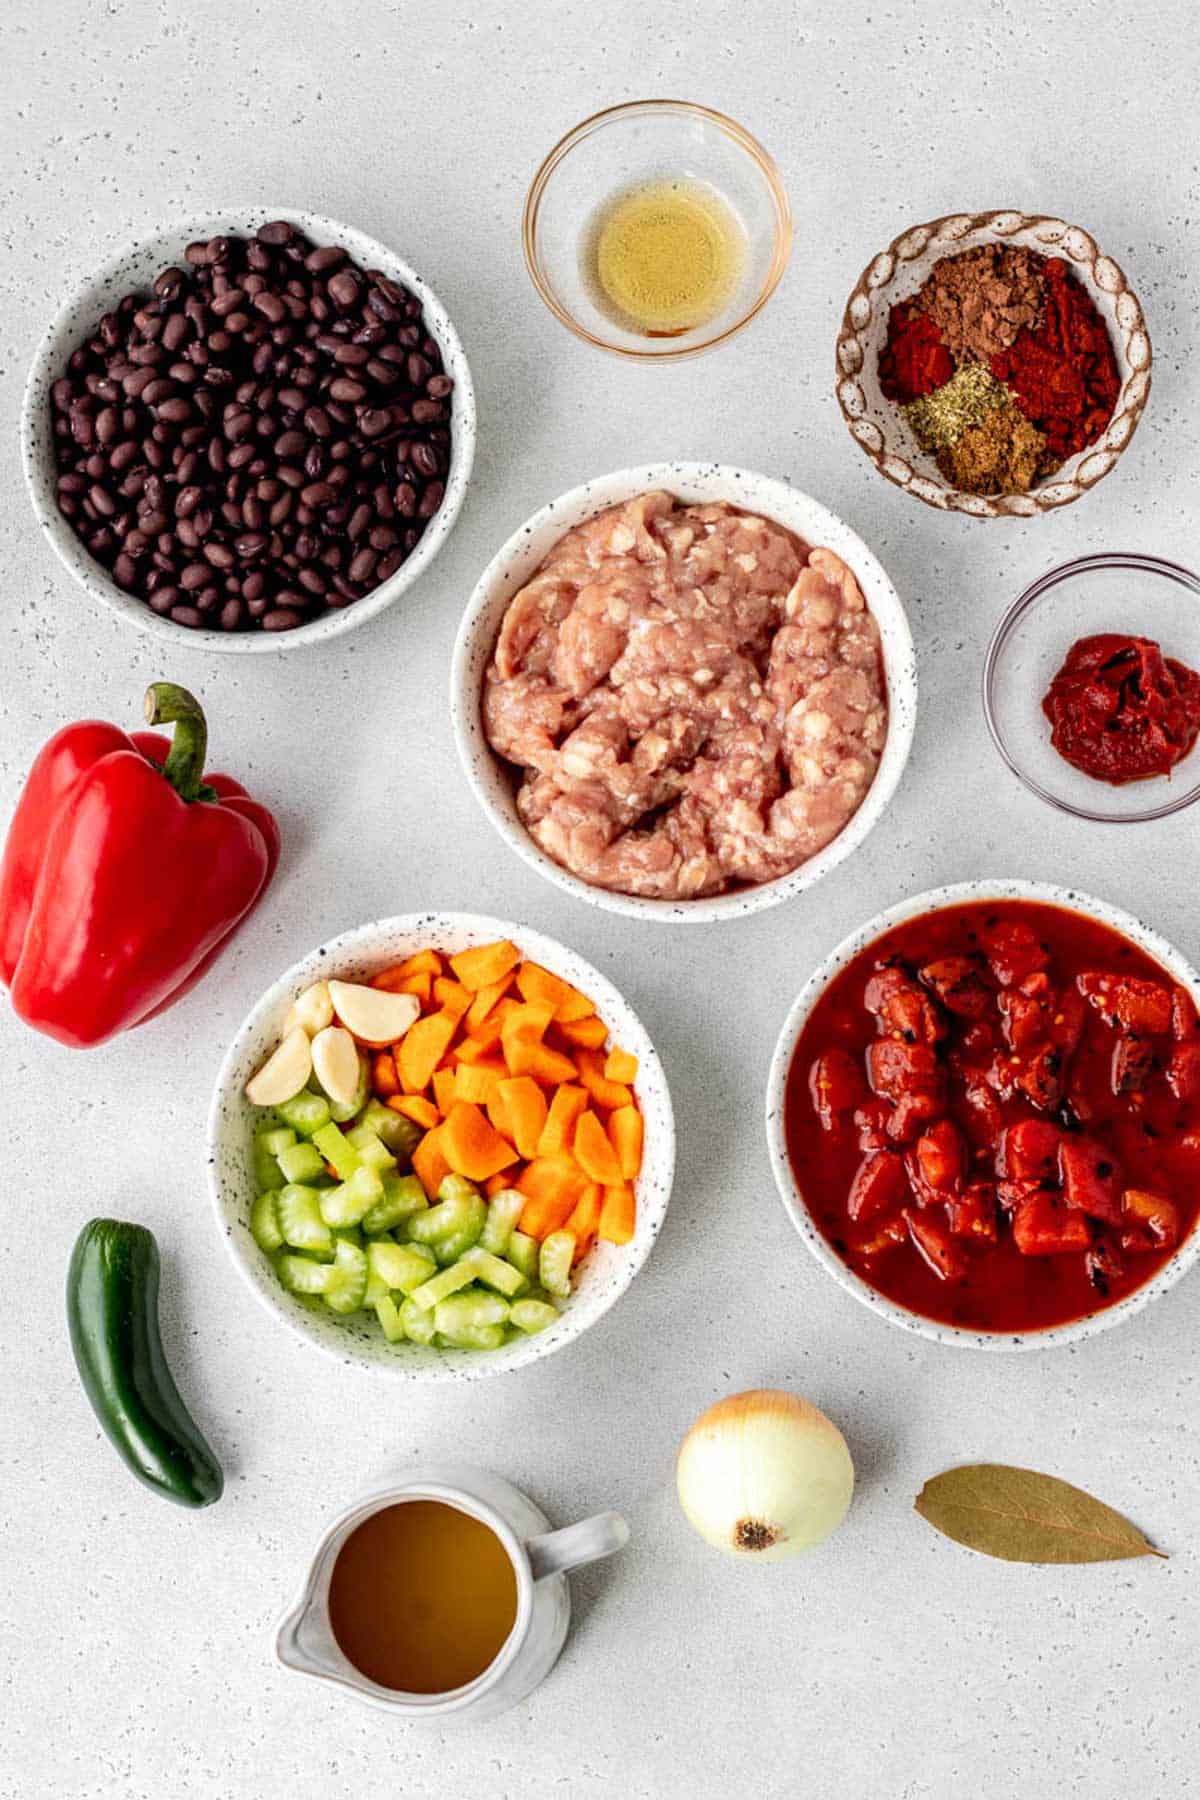 The ingredients for one pot turkey chili, including black beans, ground turkey, olive oil, spices, tomato paste, jalapeno, garlic, carrot, celery, chicken broth, onion, bay leaf and fire roasted tomatoes.